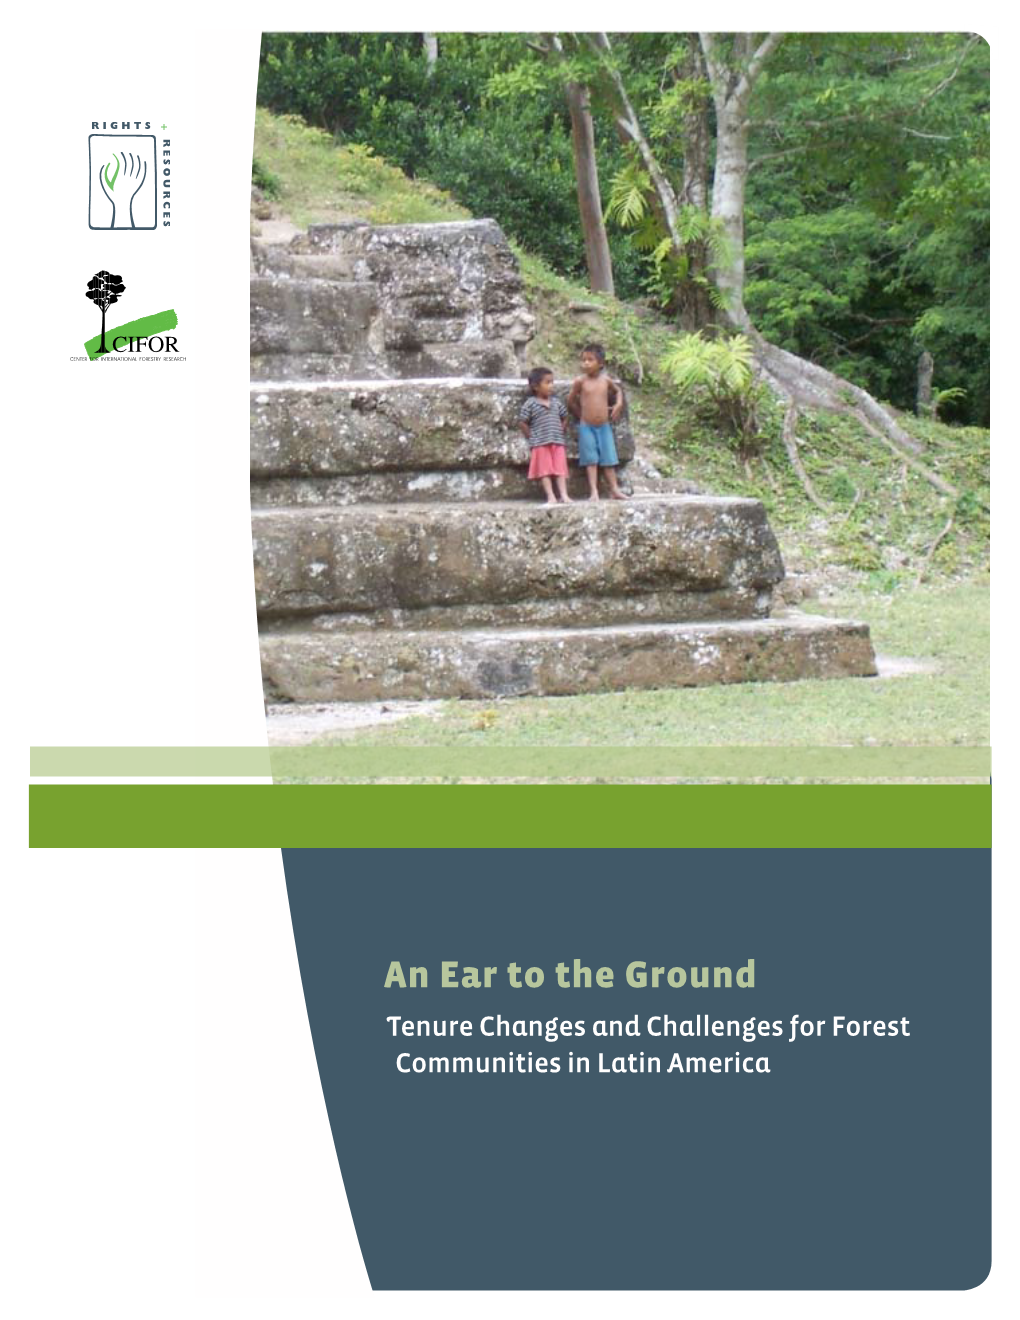 An Ear to the Ground Tenure Changes and Challenges for Forest Communities in Latin America the Rights and Resources Initiative